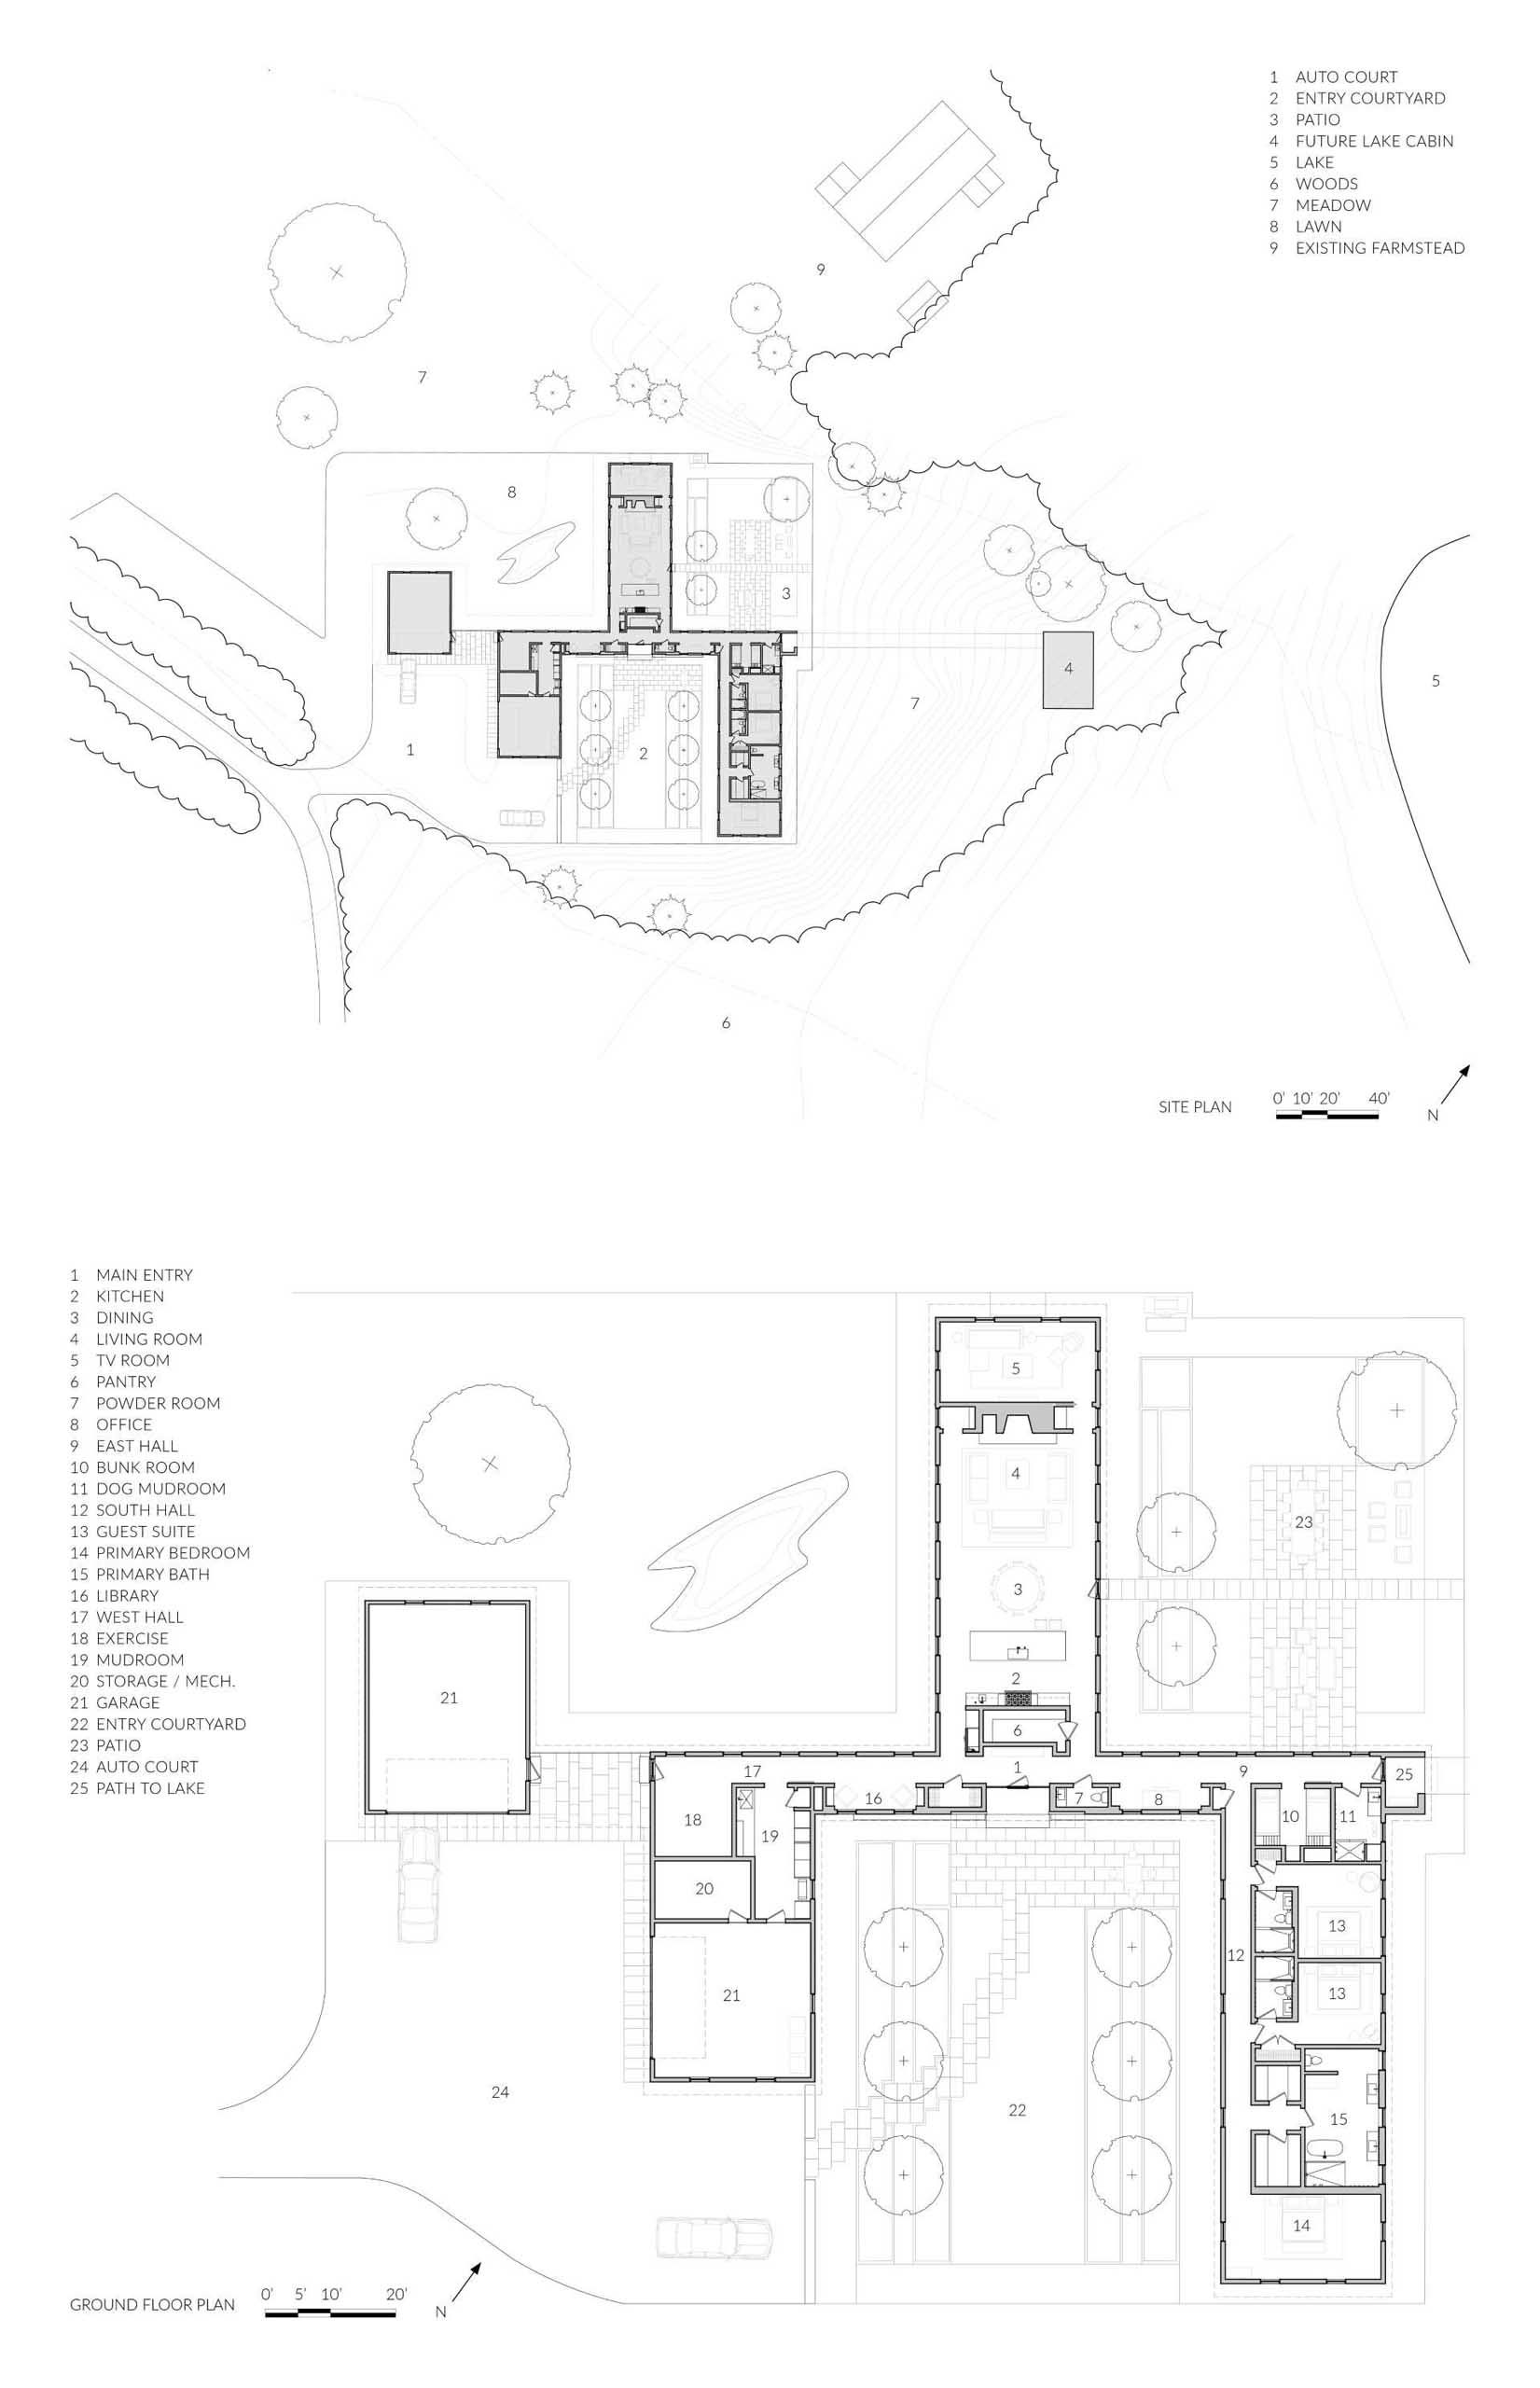 The floor plan and layout of a modern homestead.